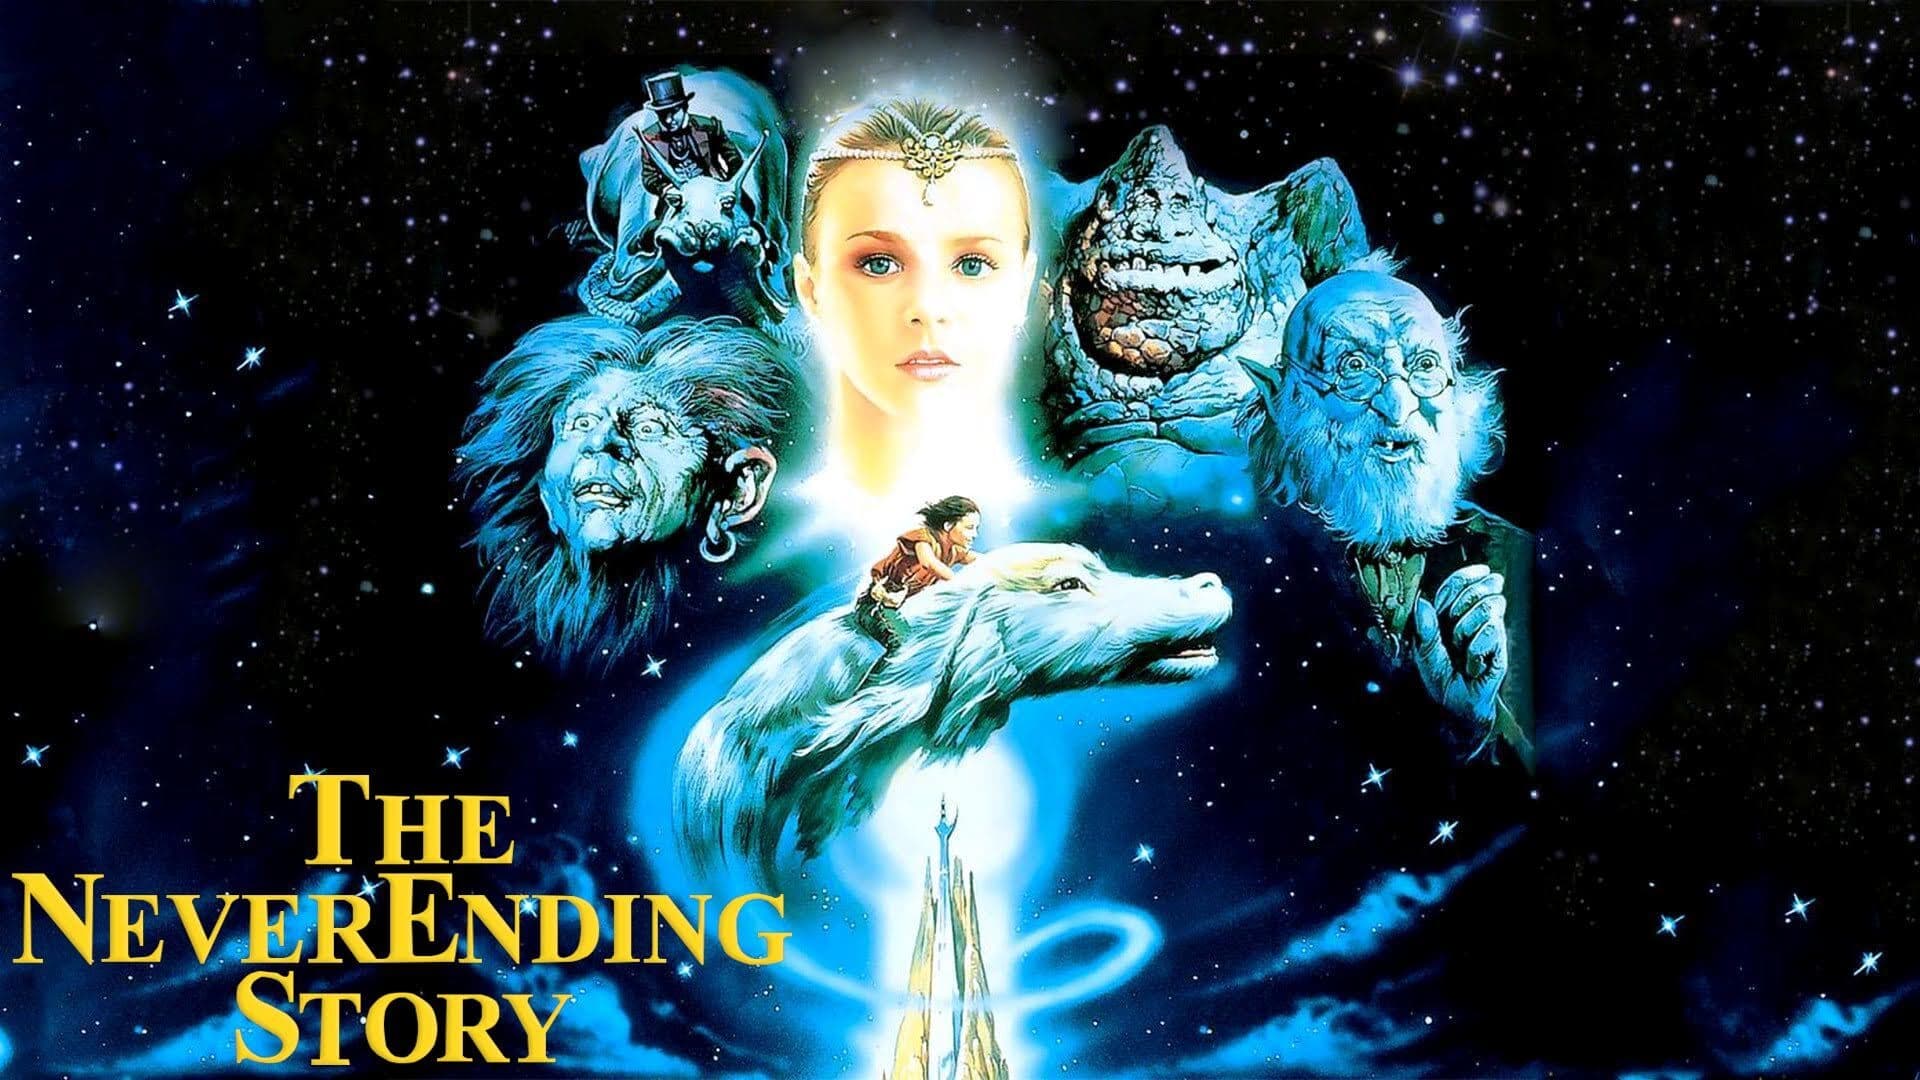 38-facts-about-the-movie-the-neverending-story